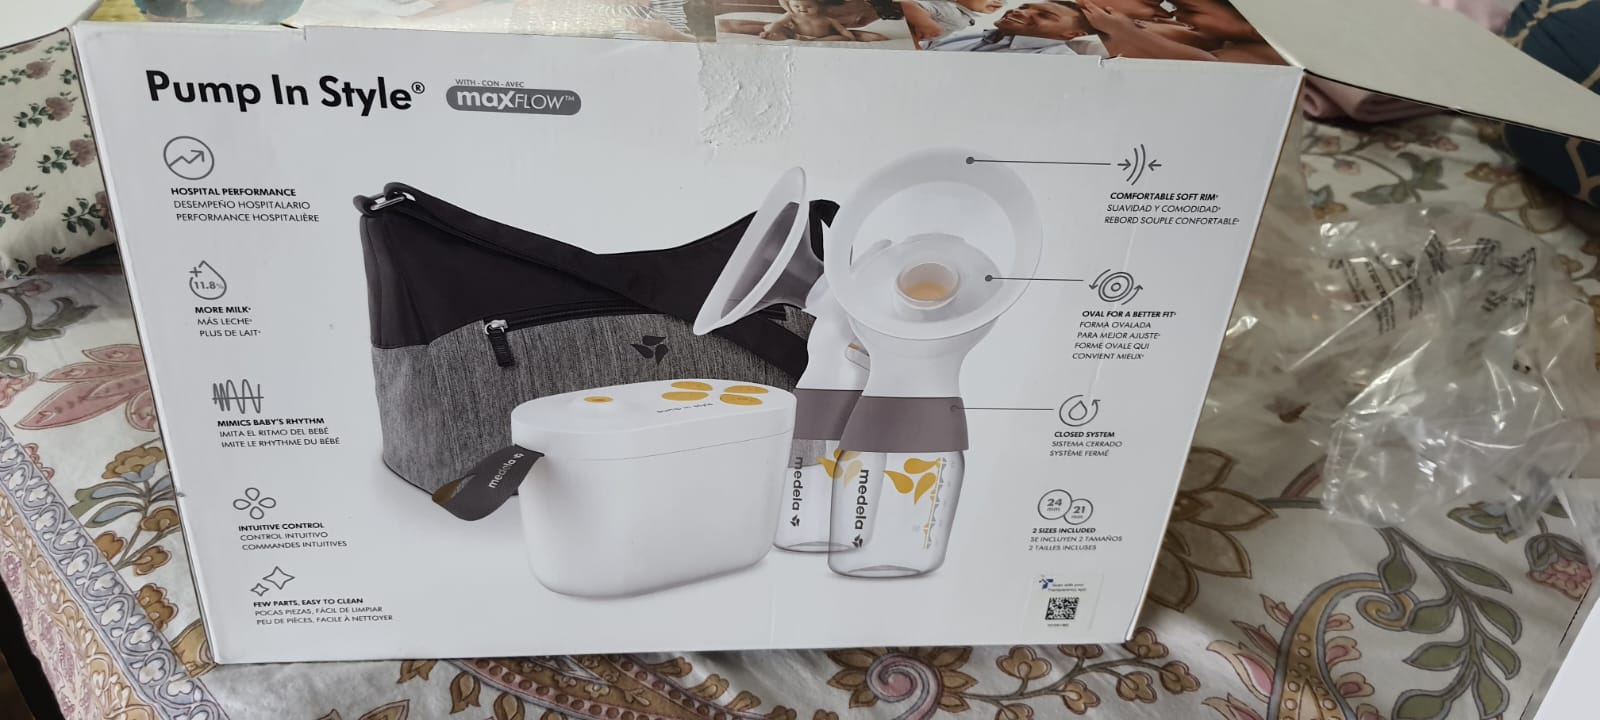 Medela double electric Pump in style Maxflow Breast Pump